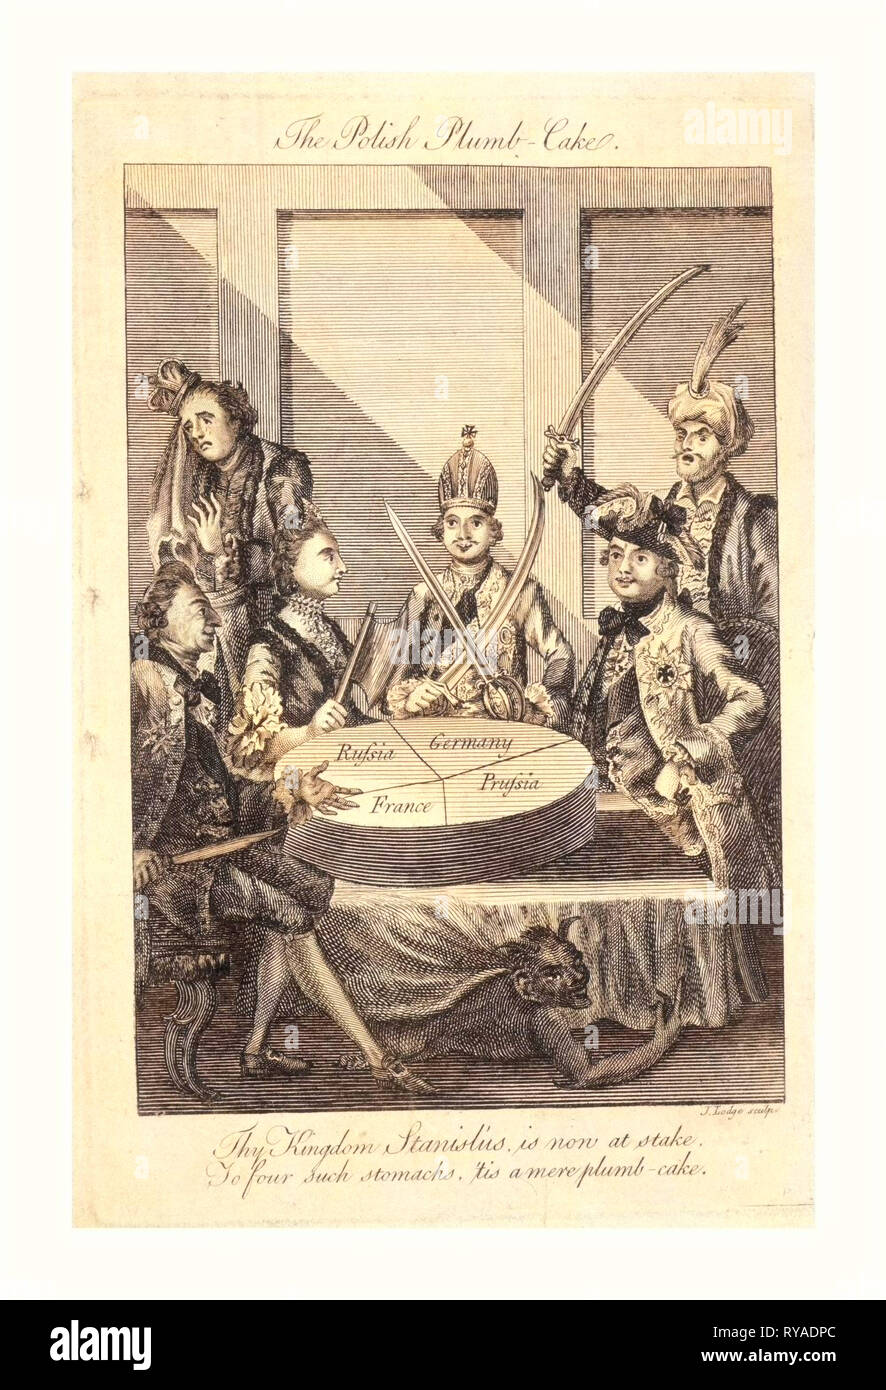 The Polish Plumb-Cake, Lodge, John, -1796, Engraving 1774, Leopold II and  Frederick William II with Swords Drawn, Catherine II Holding a Cleaver, and  Louis XV with a Knife Seated Around a Table